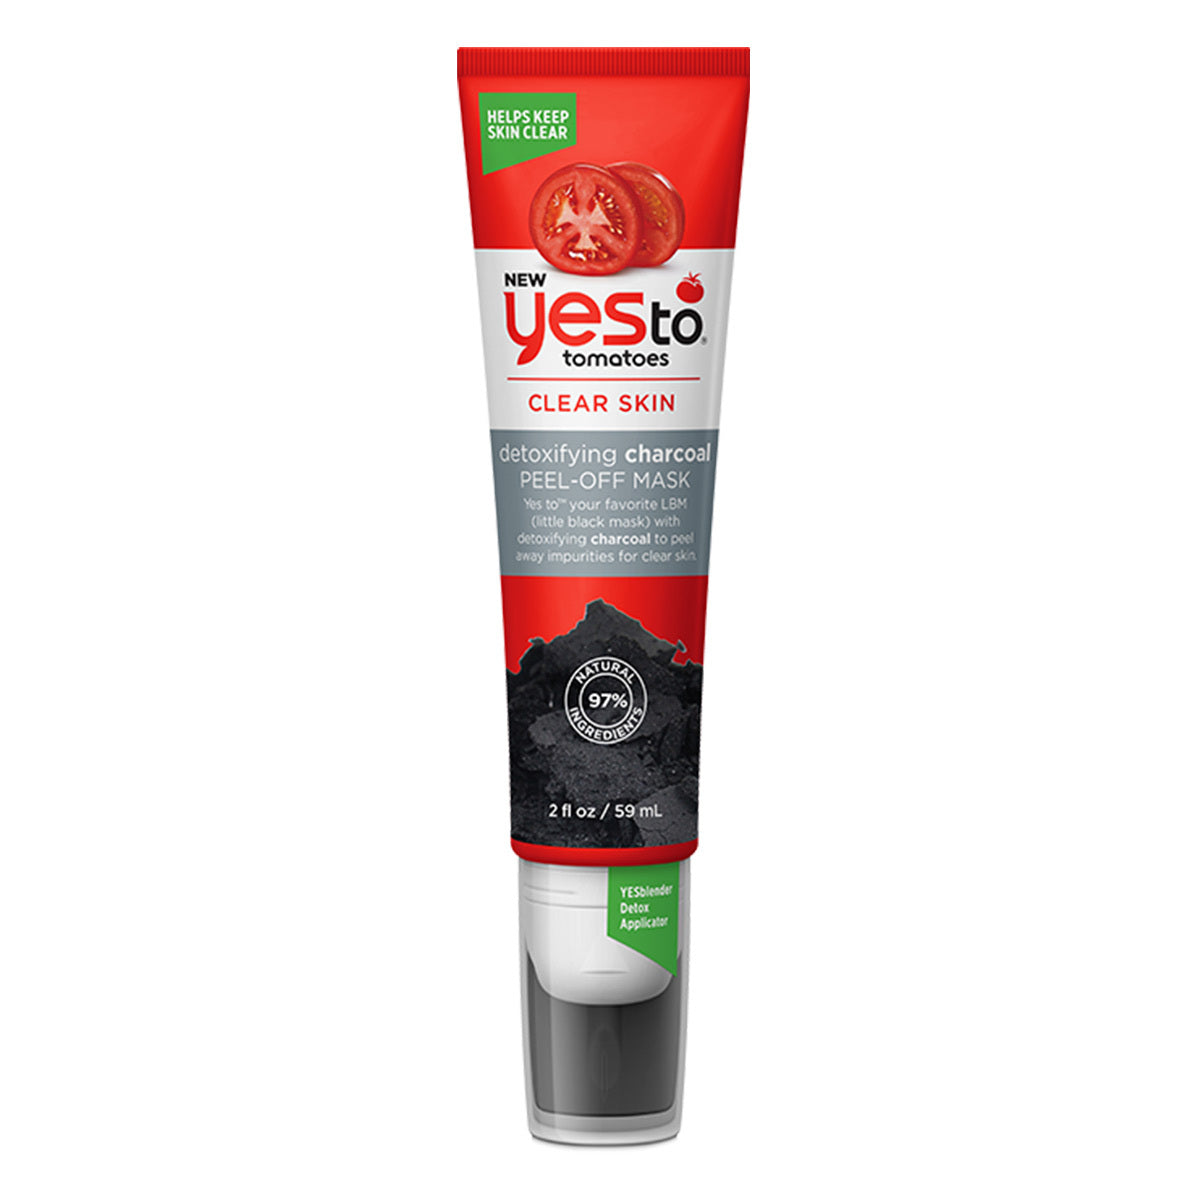 Primary image of Yes to Tomatoes Detoxifying Charcoal Peel-Off Mask